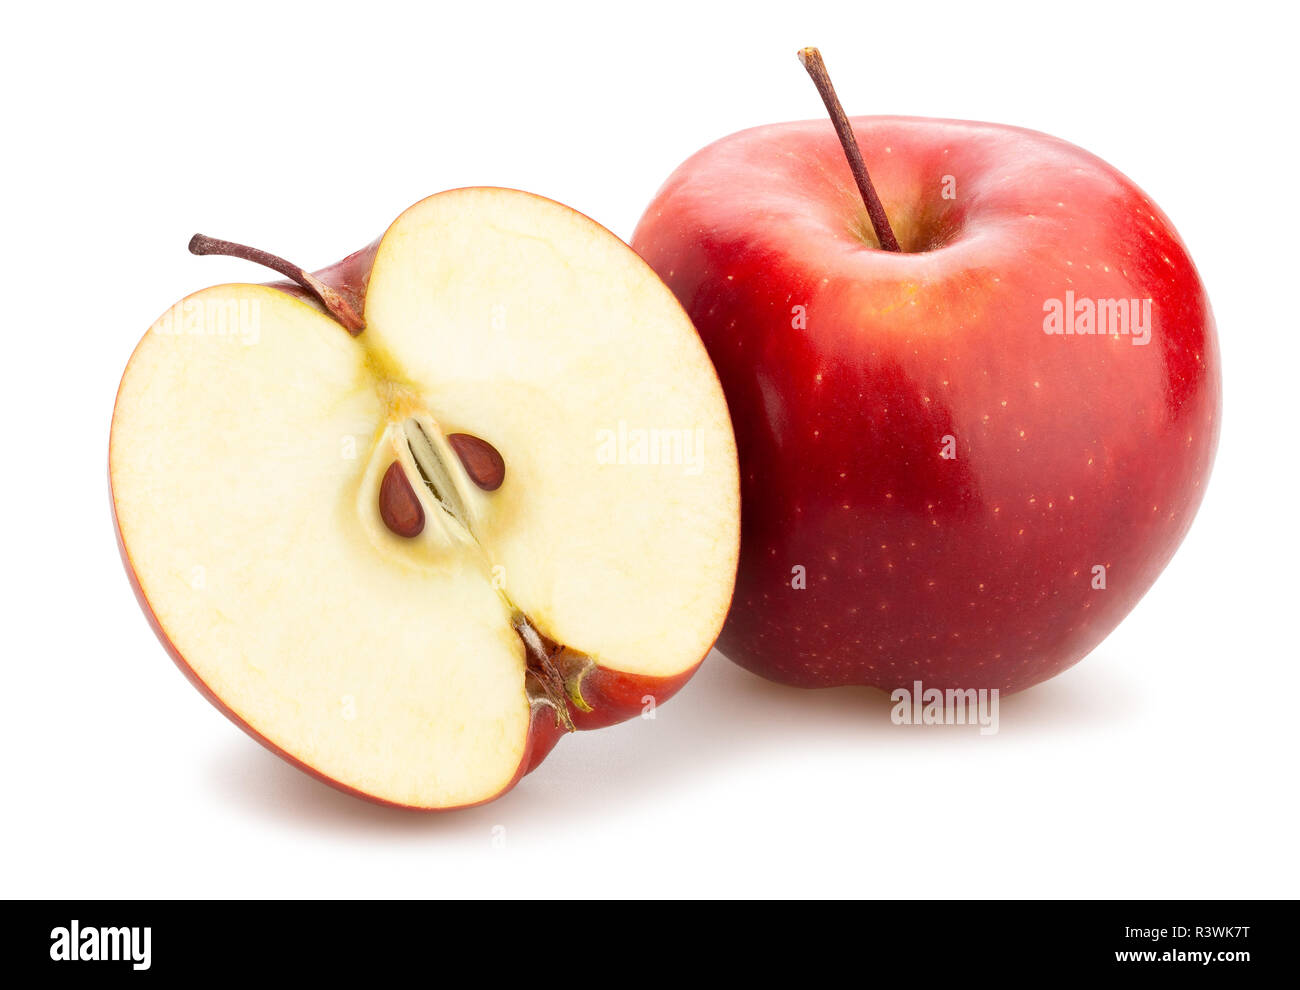 Red Apple Fruit with Slice and Green Leaf Isolated on White Stock Image -  Image of chopped, objects: 117149257